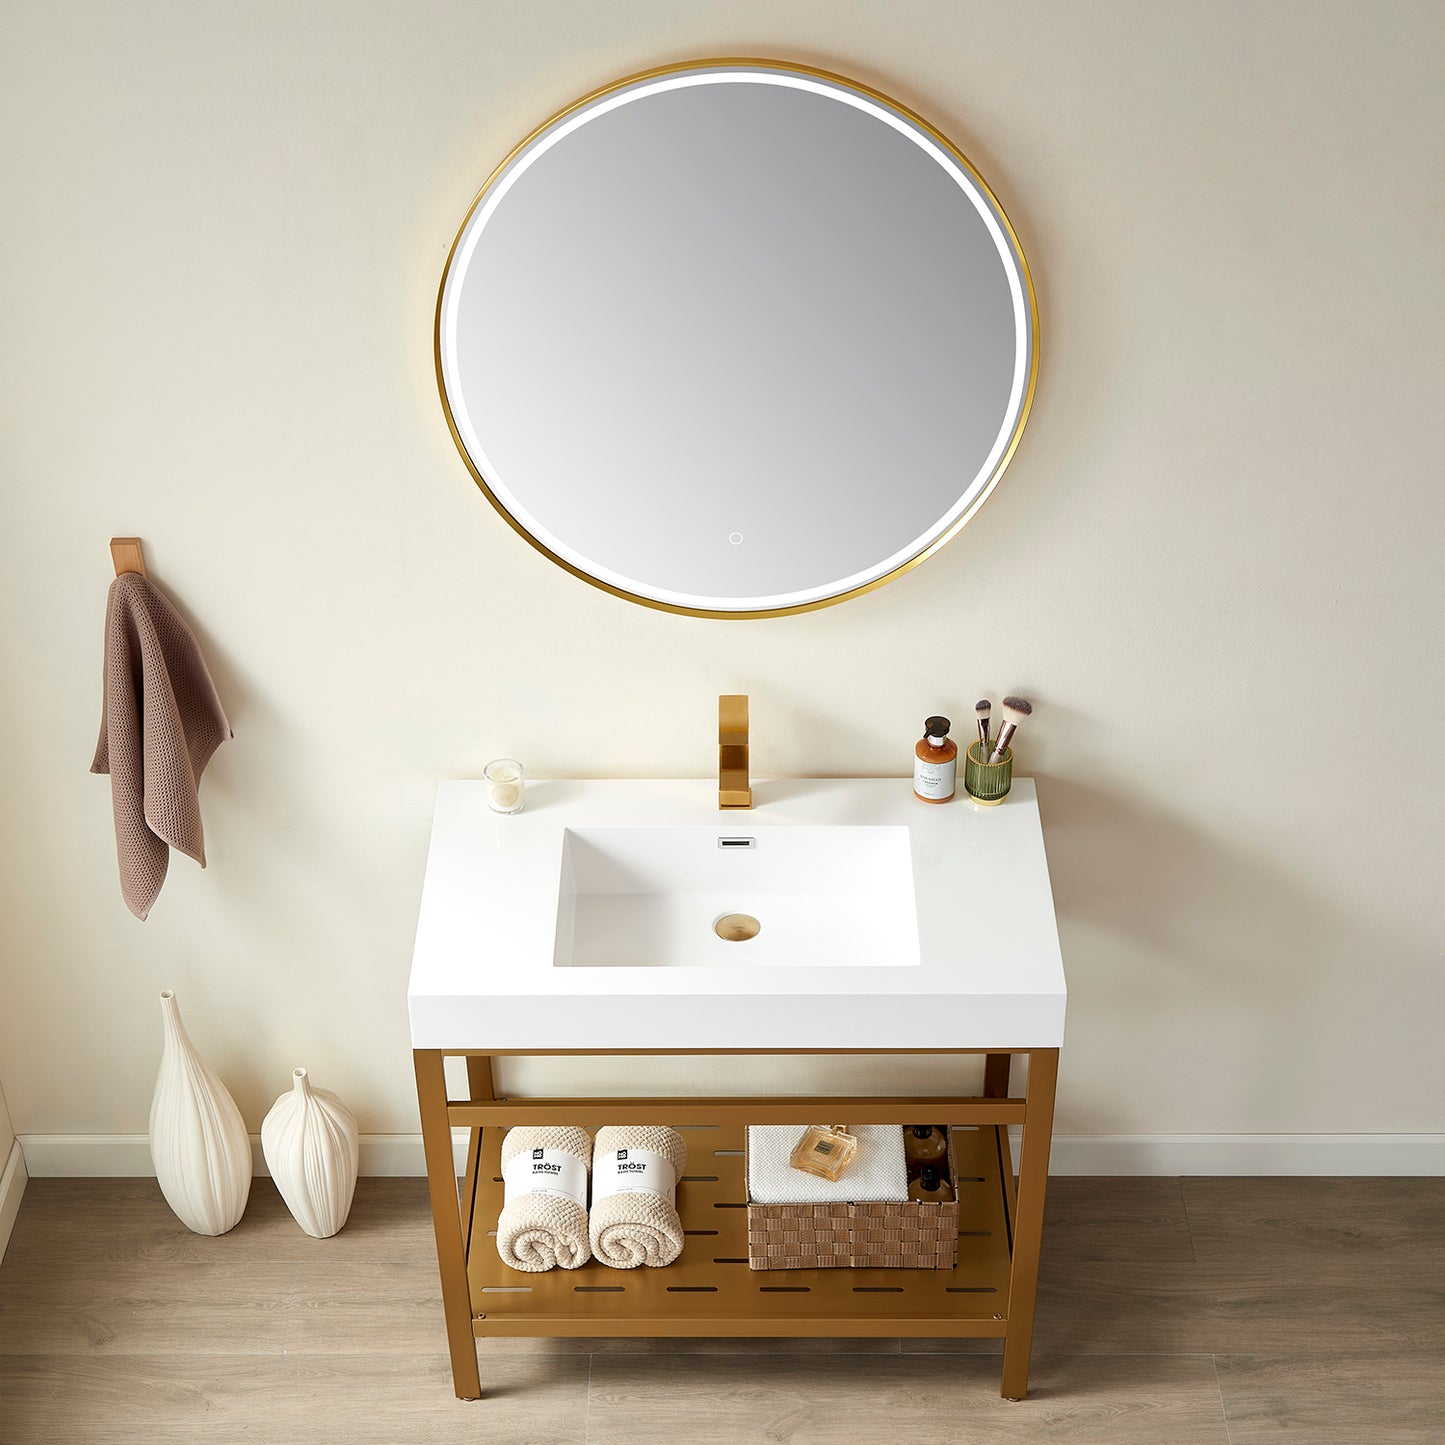 Ablitas Single Sink Bath Vanity with Black/White/Grey One-Piece Composite Stone Sink Top and Optional Mirror